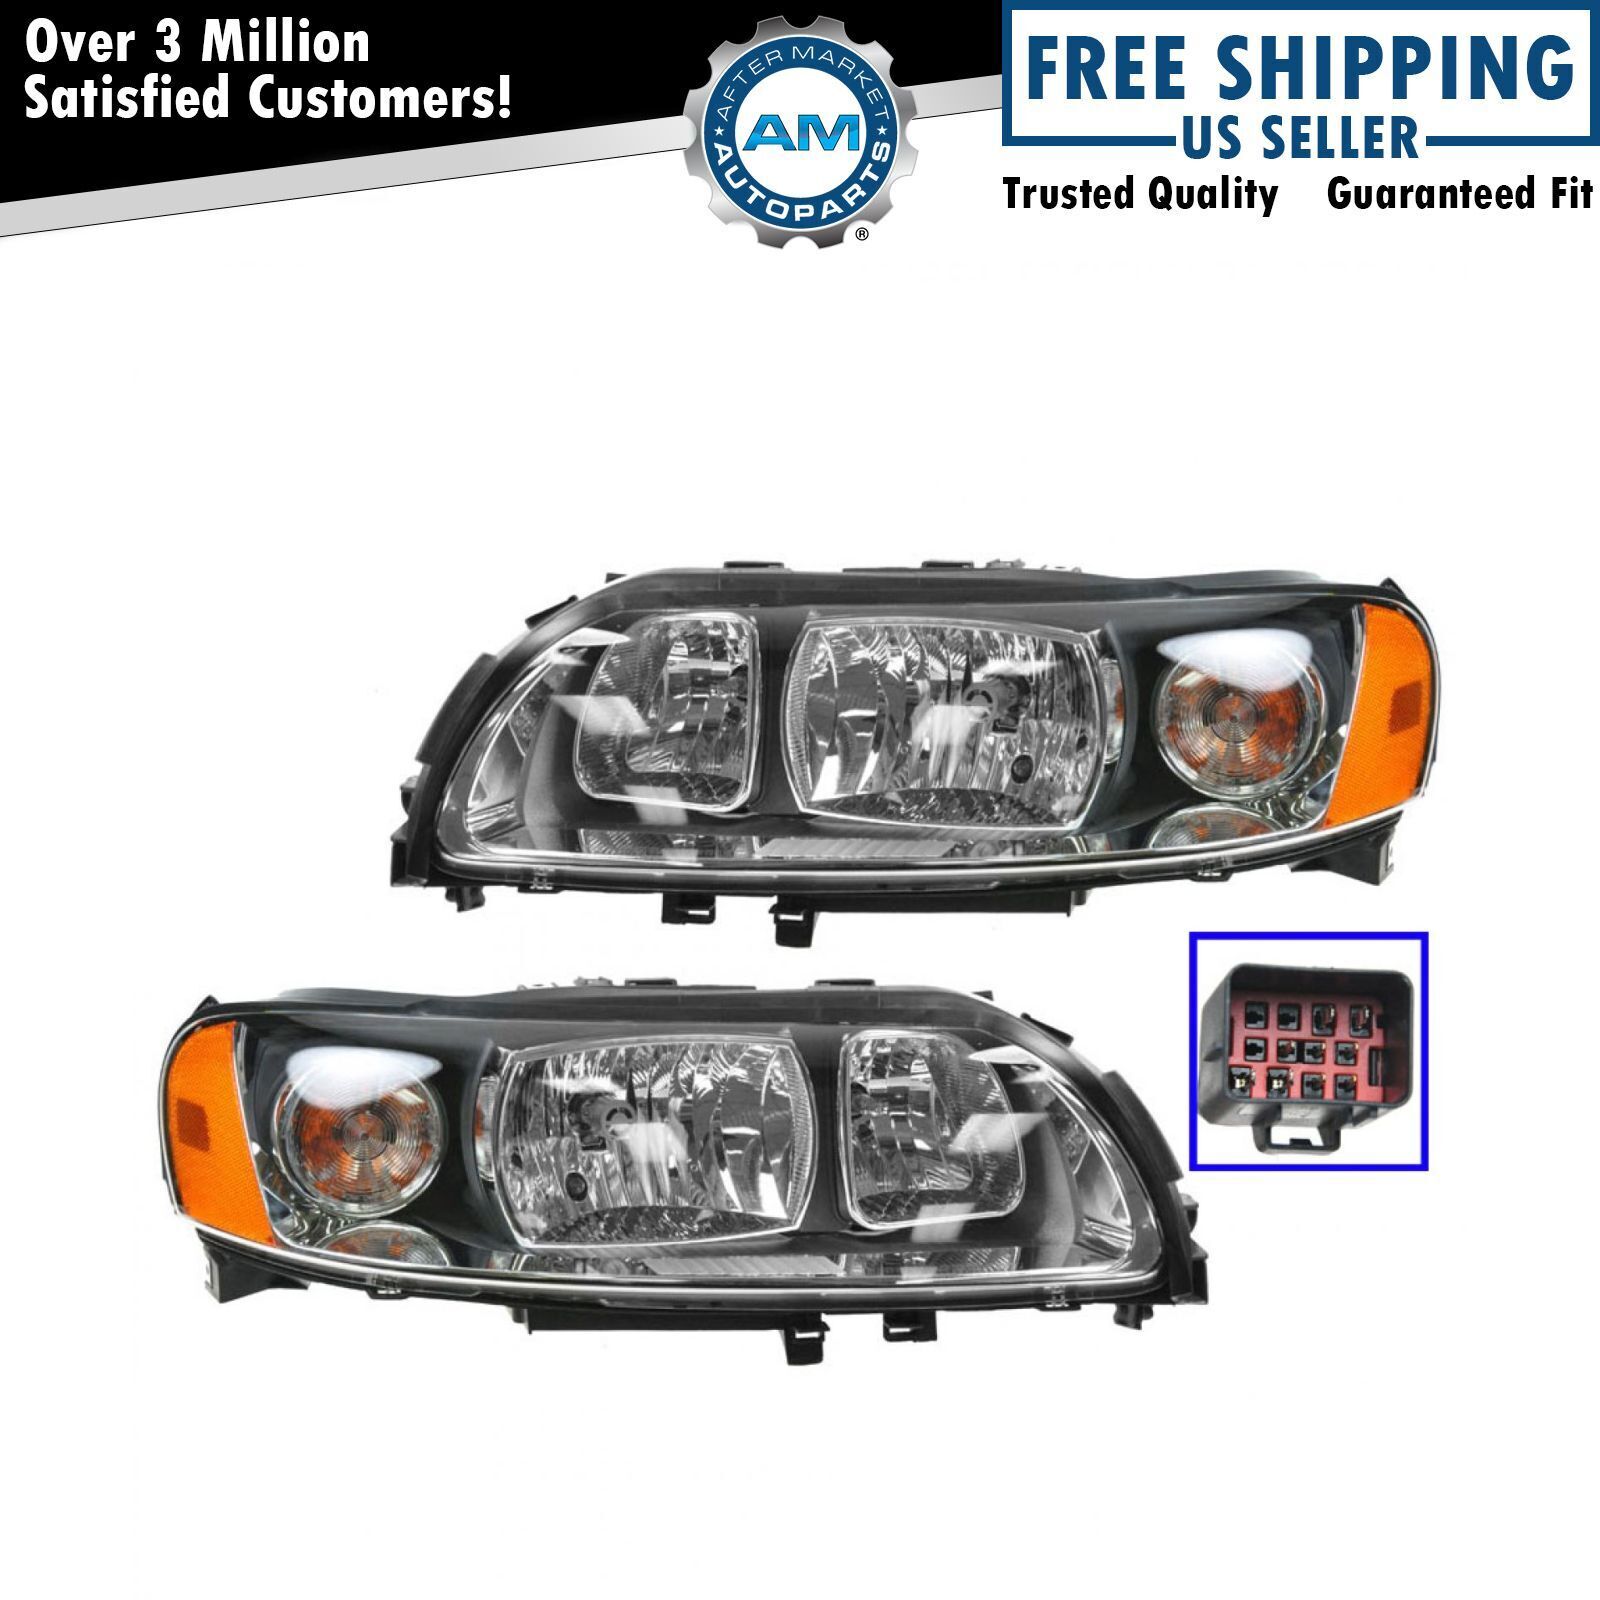 Headlights Headlamps Left & Right Pair Set NEW for 05-09 Volvo S60